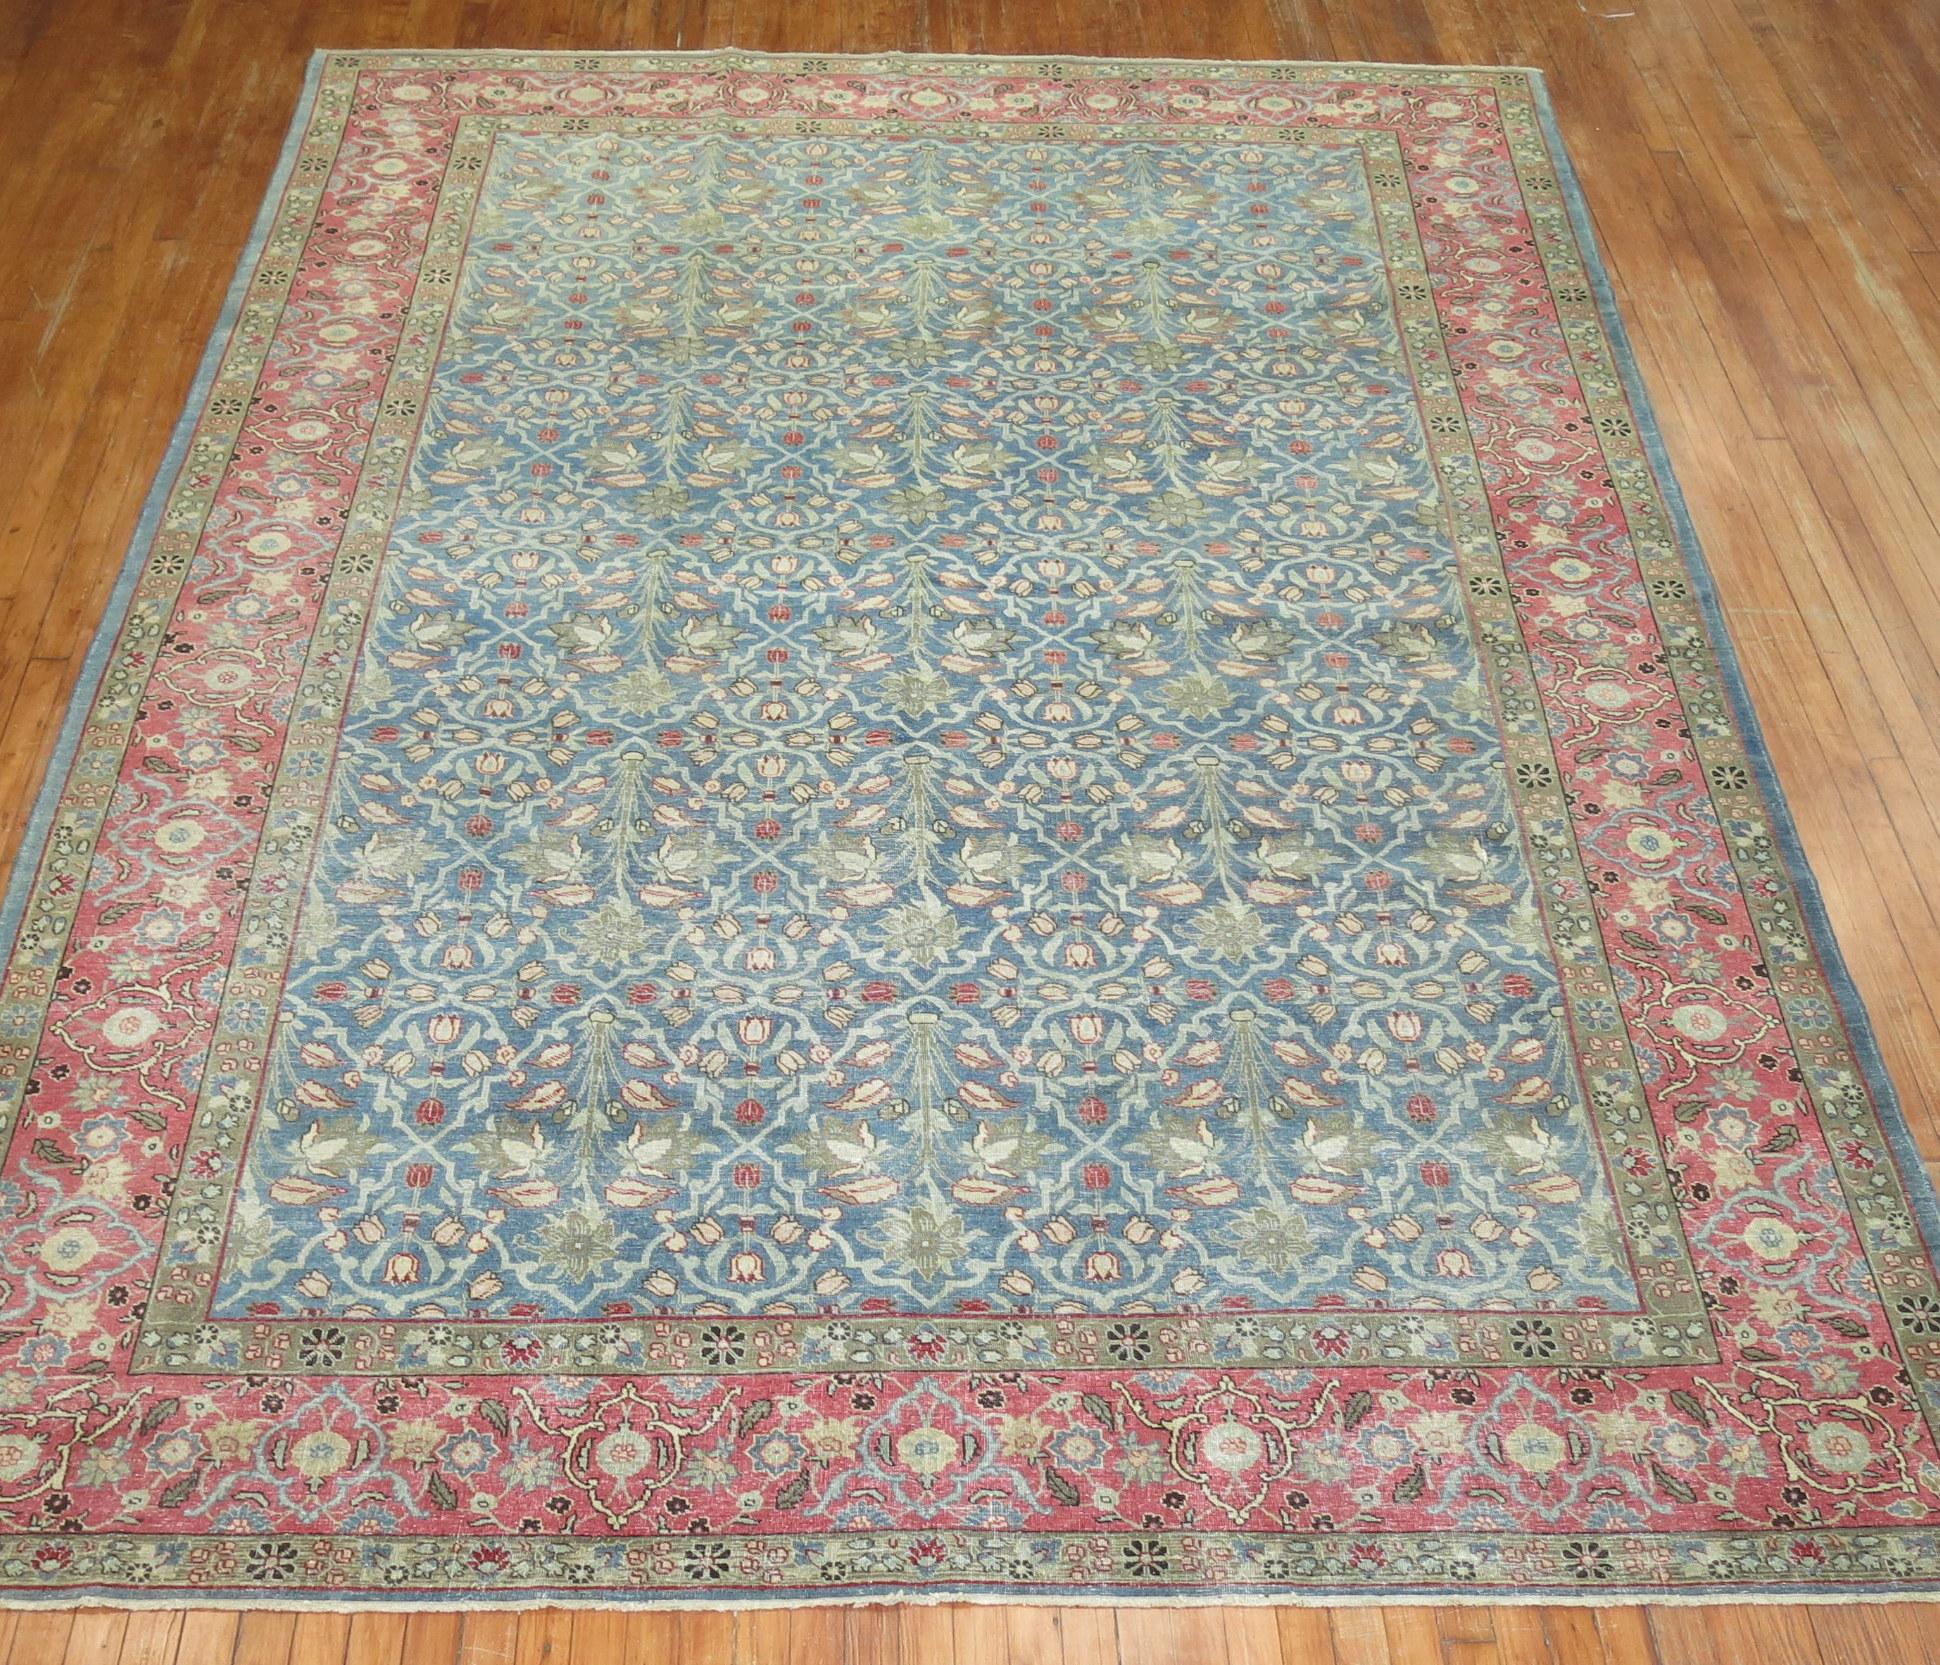 An early 20th-century highly decorative Persian Tabriz rug 

Measures: 8'2'' x 11'8''